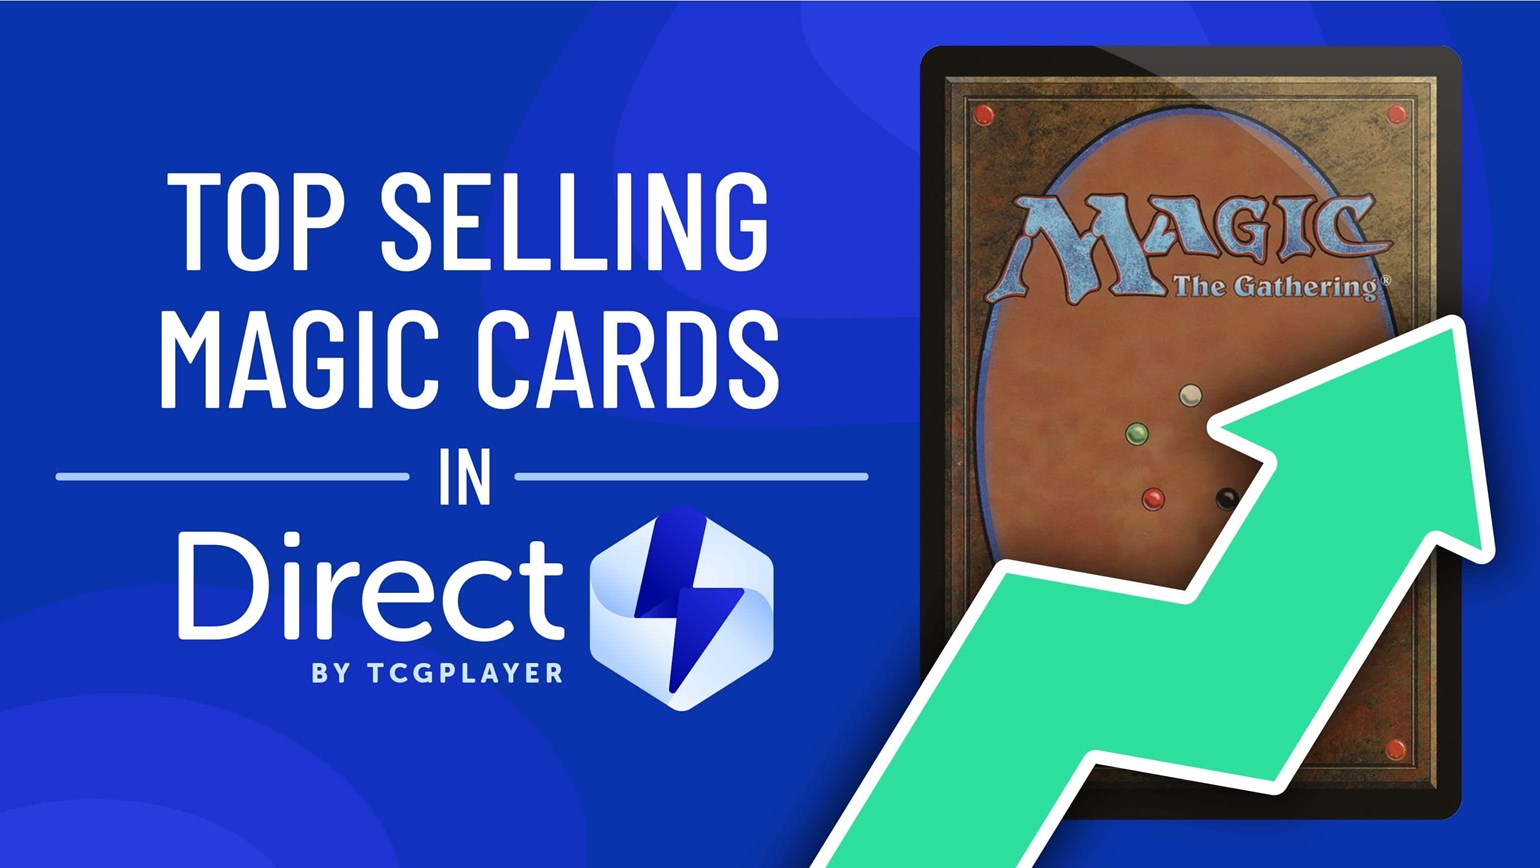 January Top Selling Magic: The Gathering Cards in Direct by TCGplayer